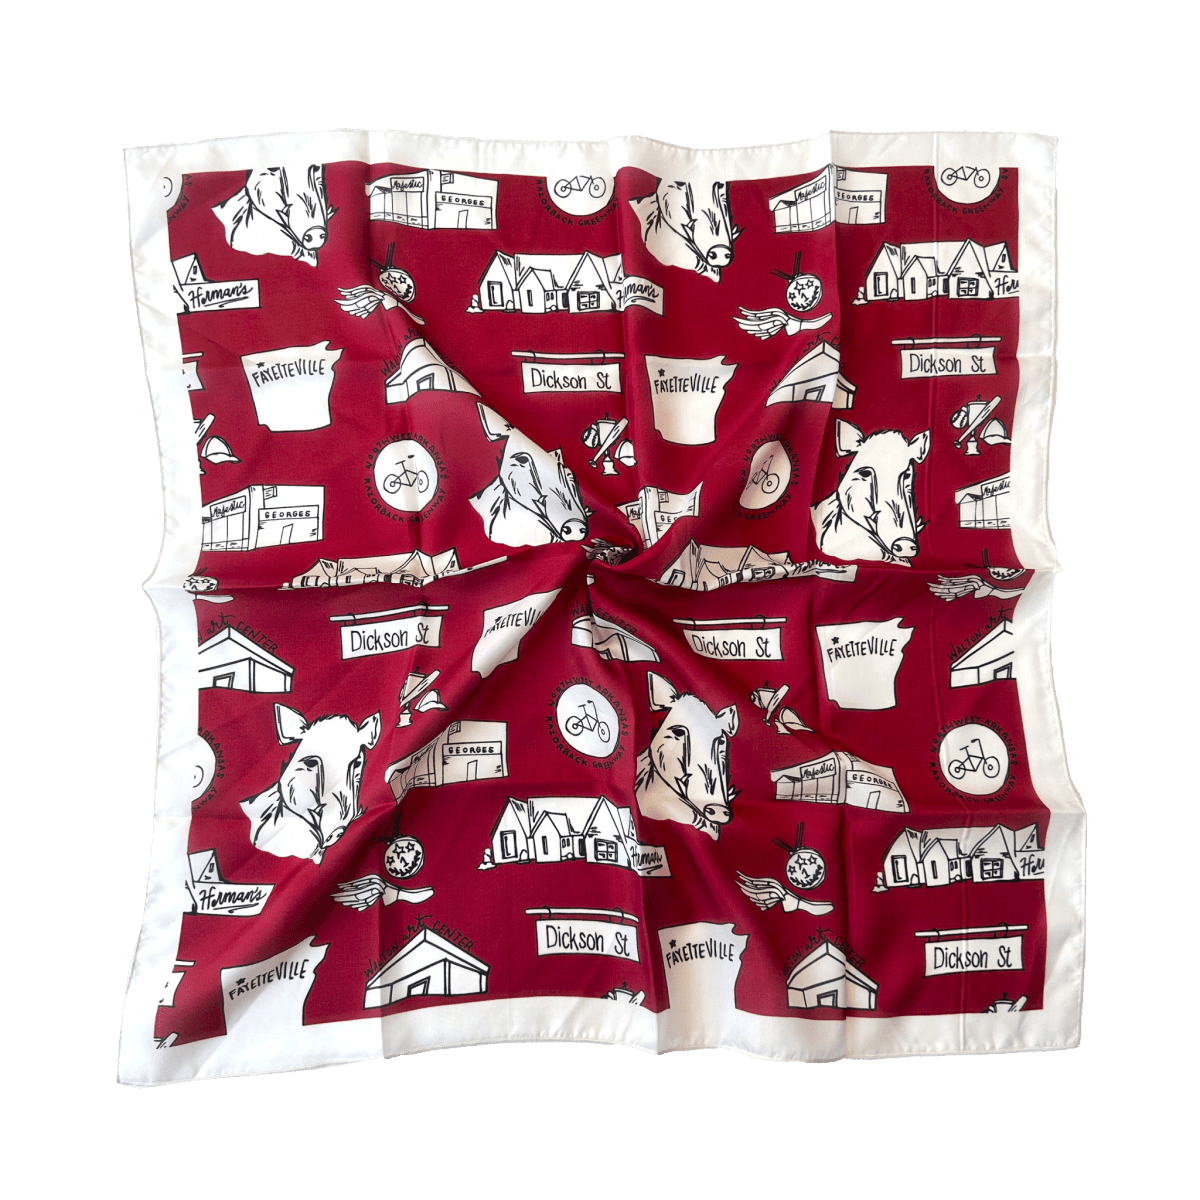 University of Arkansas College Town Toiles Campus Silk Scarves - Shop B-Unlimited